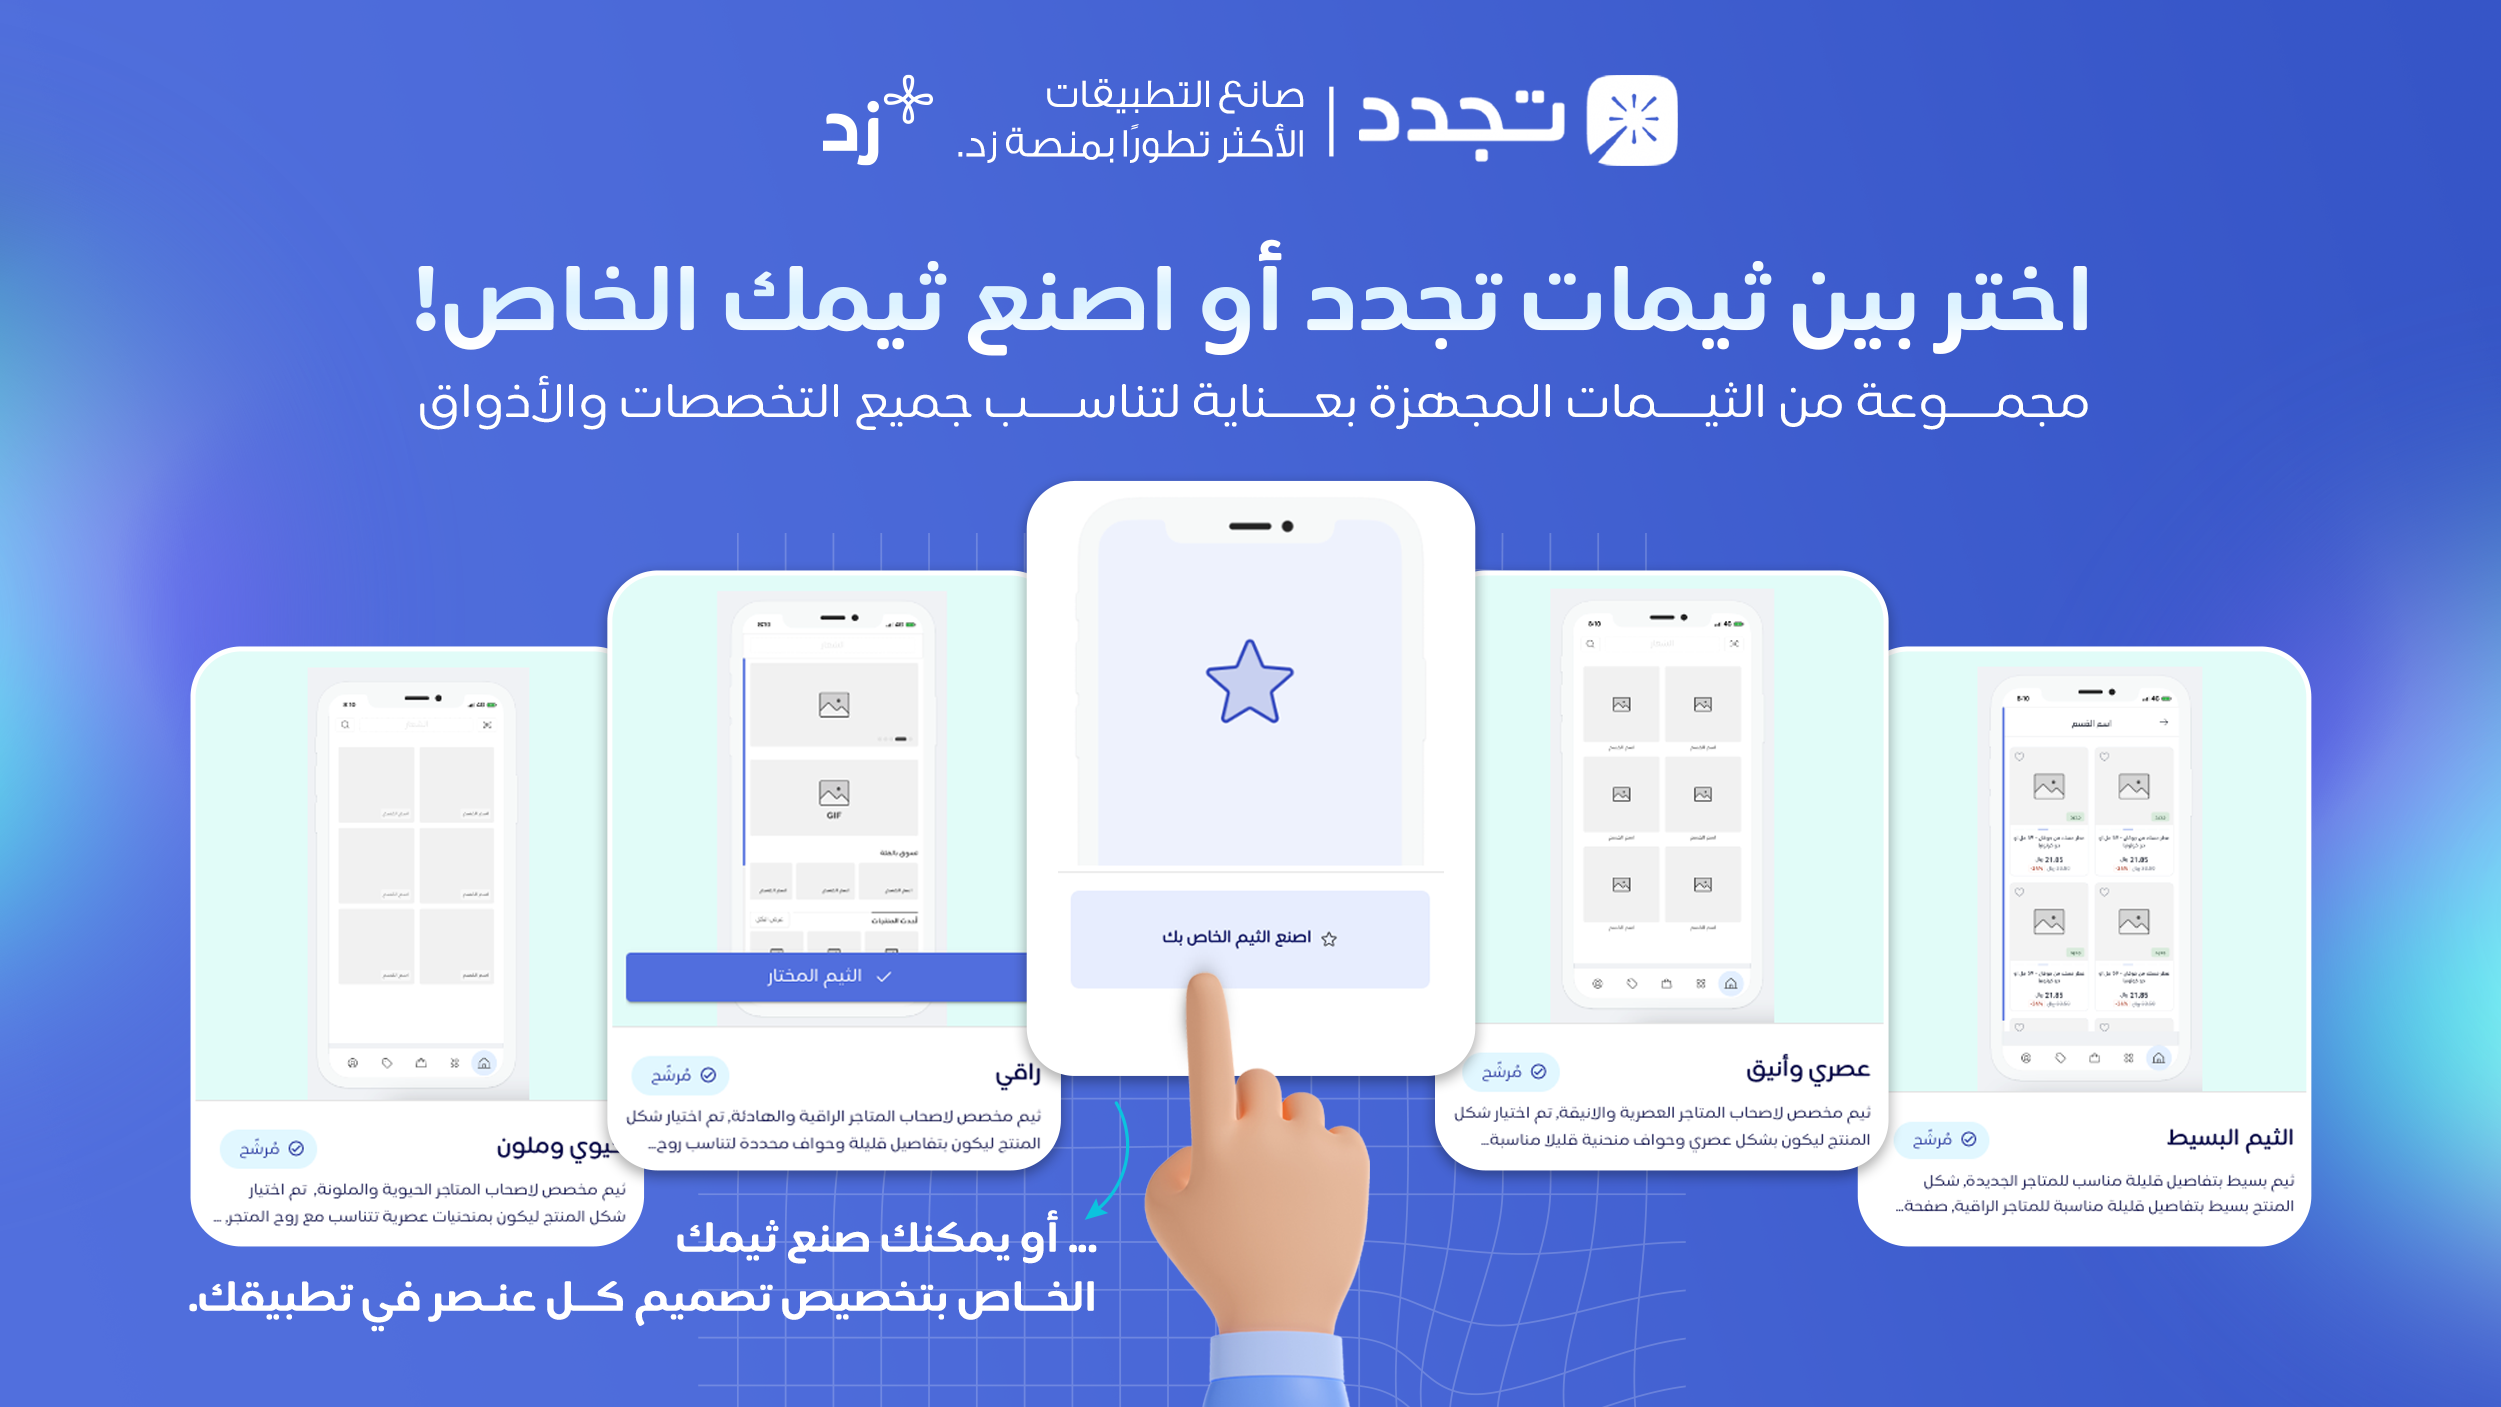 Tajadad enables you to create a mobile app for your store in 10m without tech experience using AI